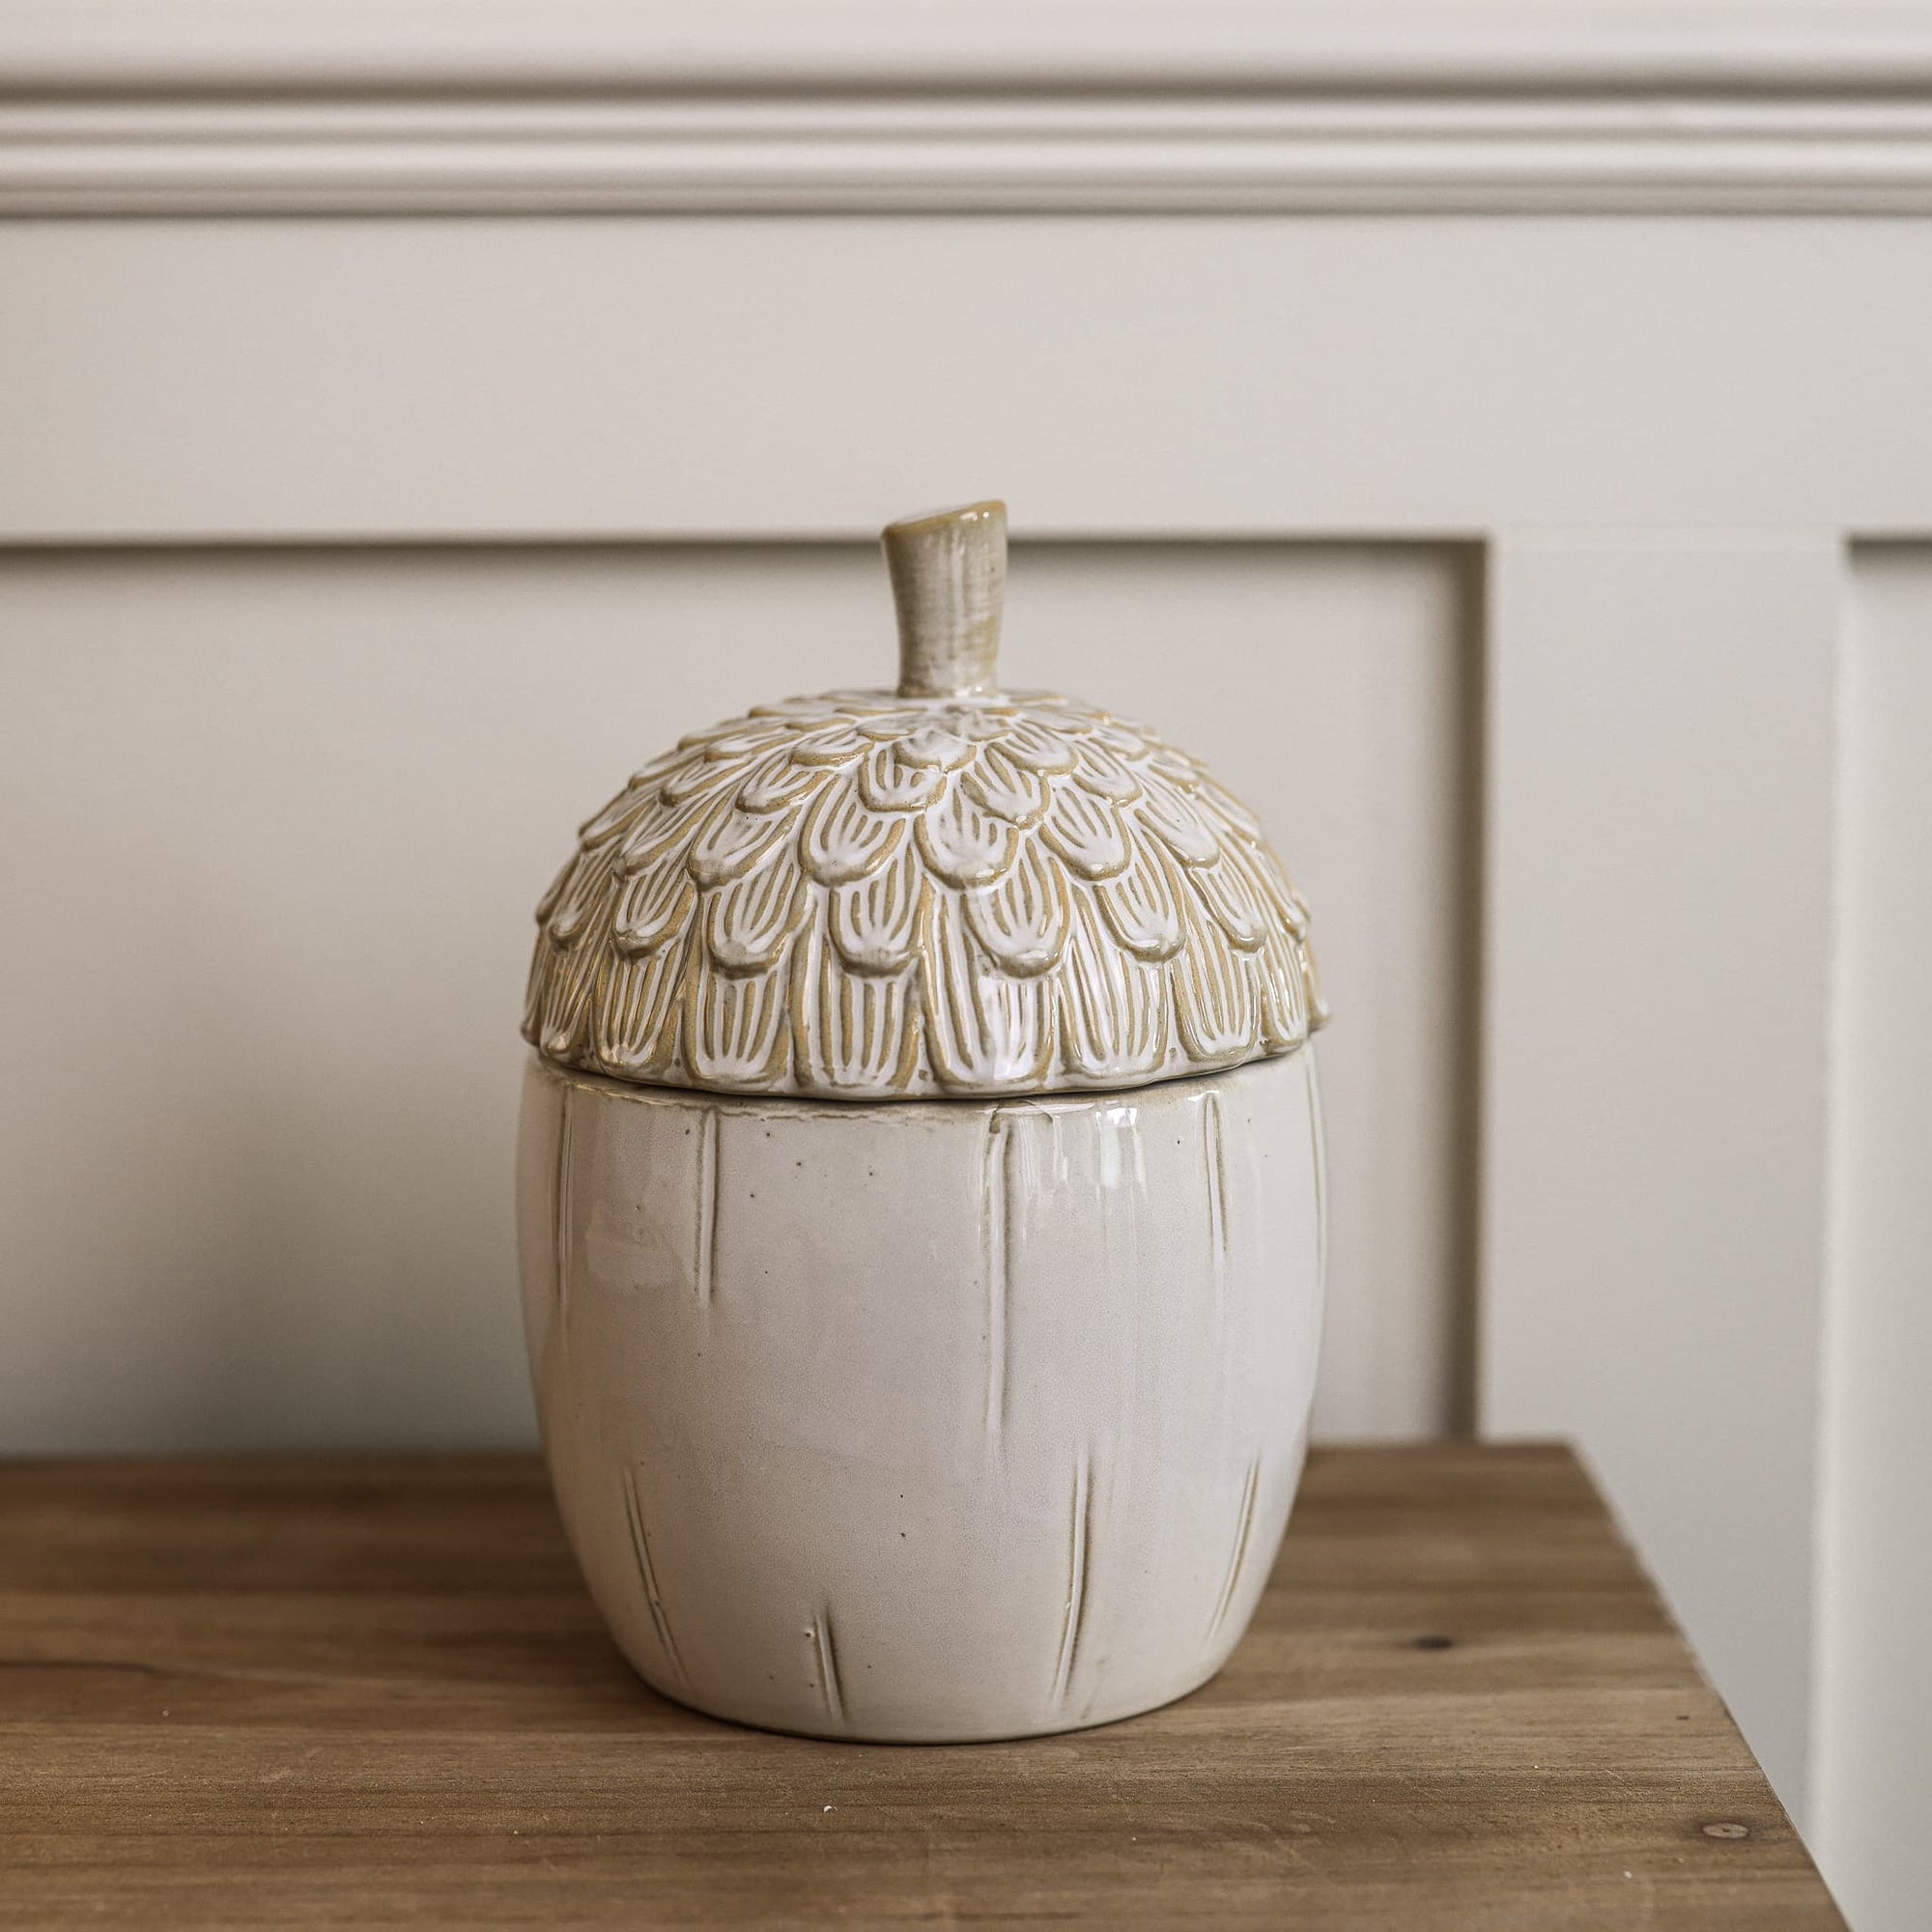 Ceramic off white acorn jar on wooden console table.